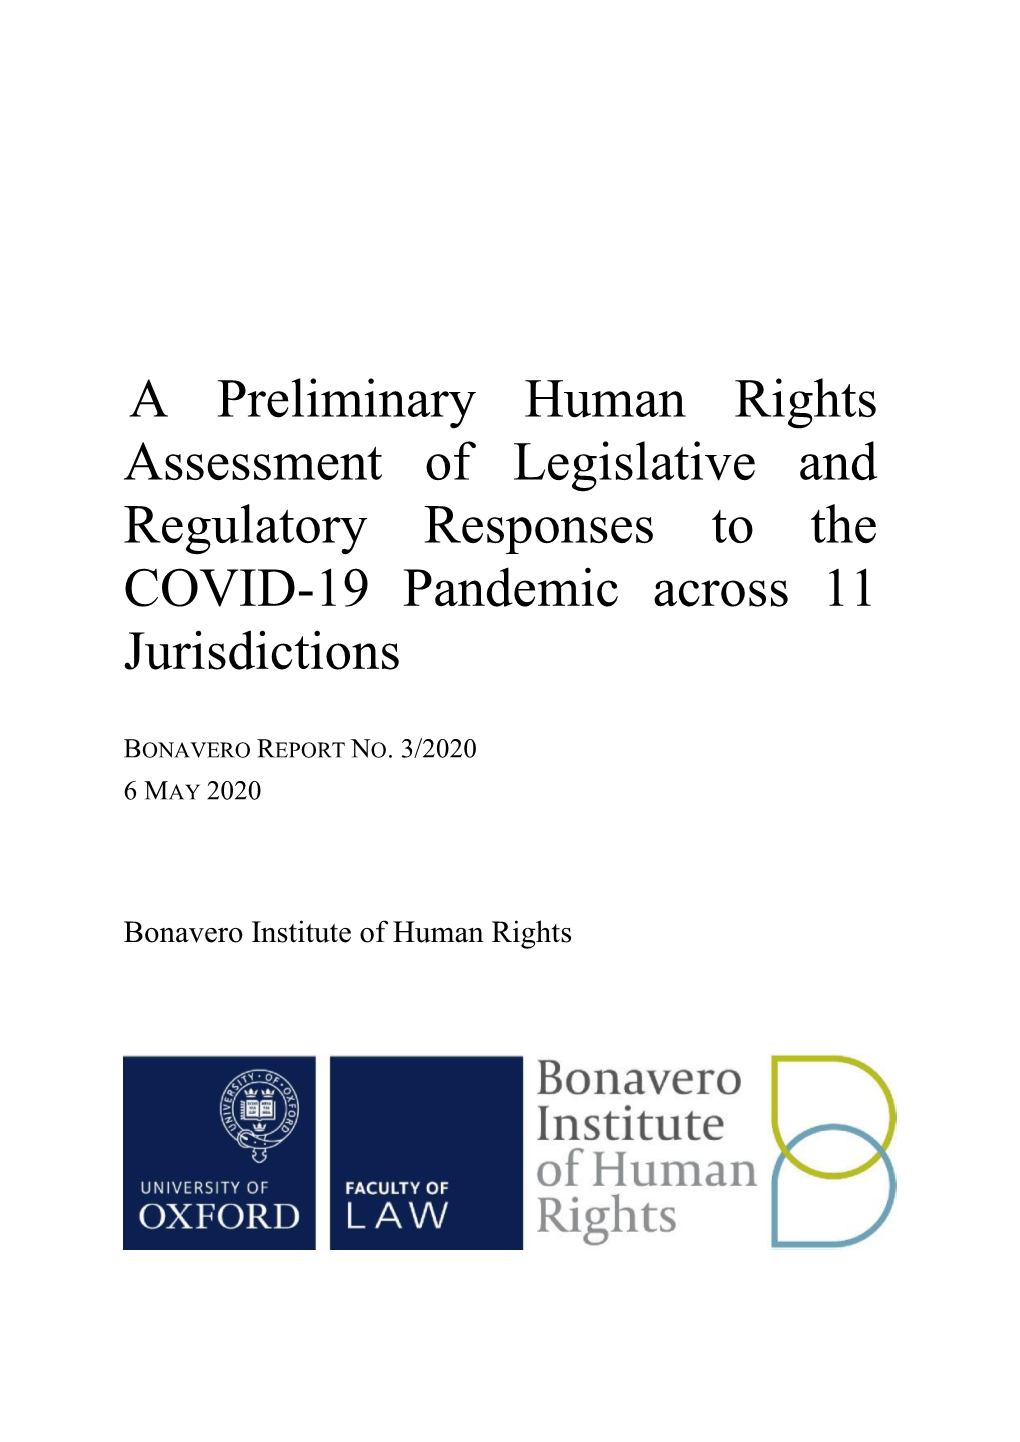 A Preliminary Human Rights Assessment of Legislative and Regulatory Responses to the COVID-19 Pandemic Across 11 Jurisdictions